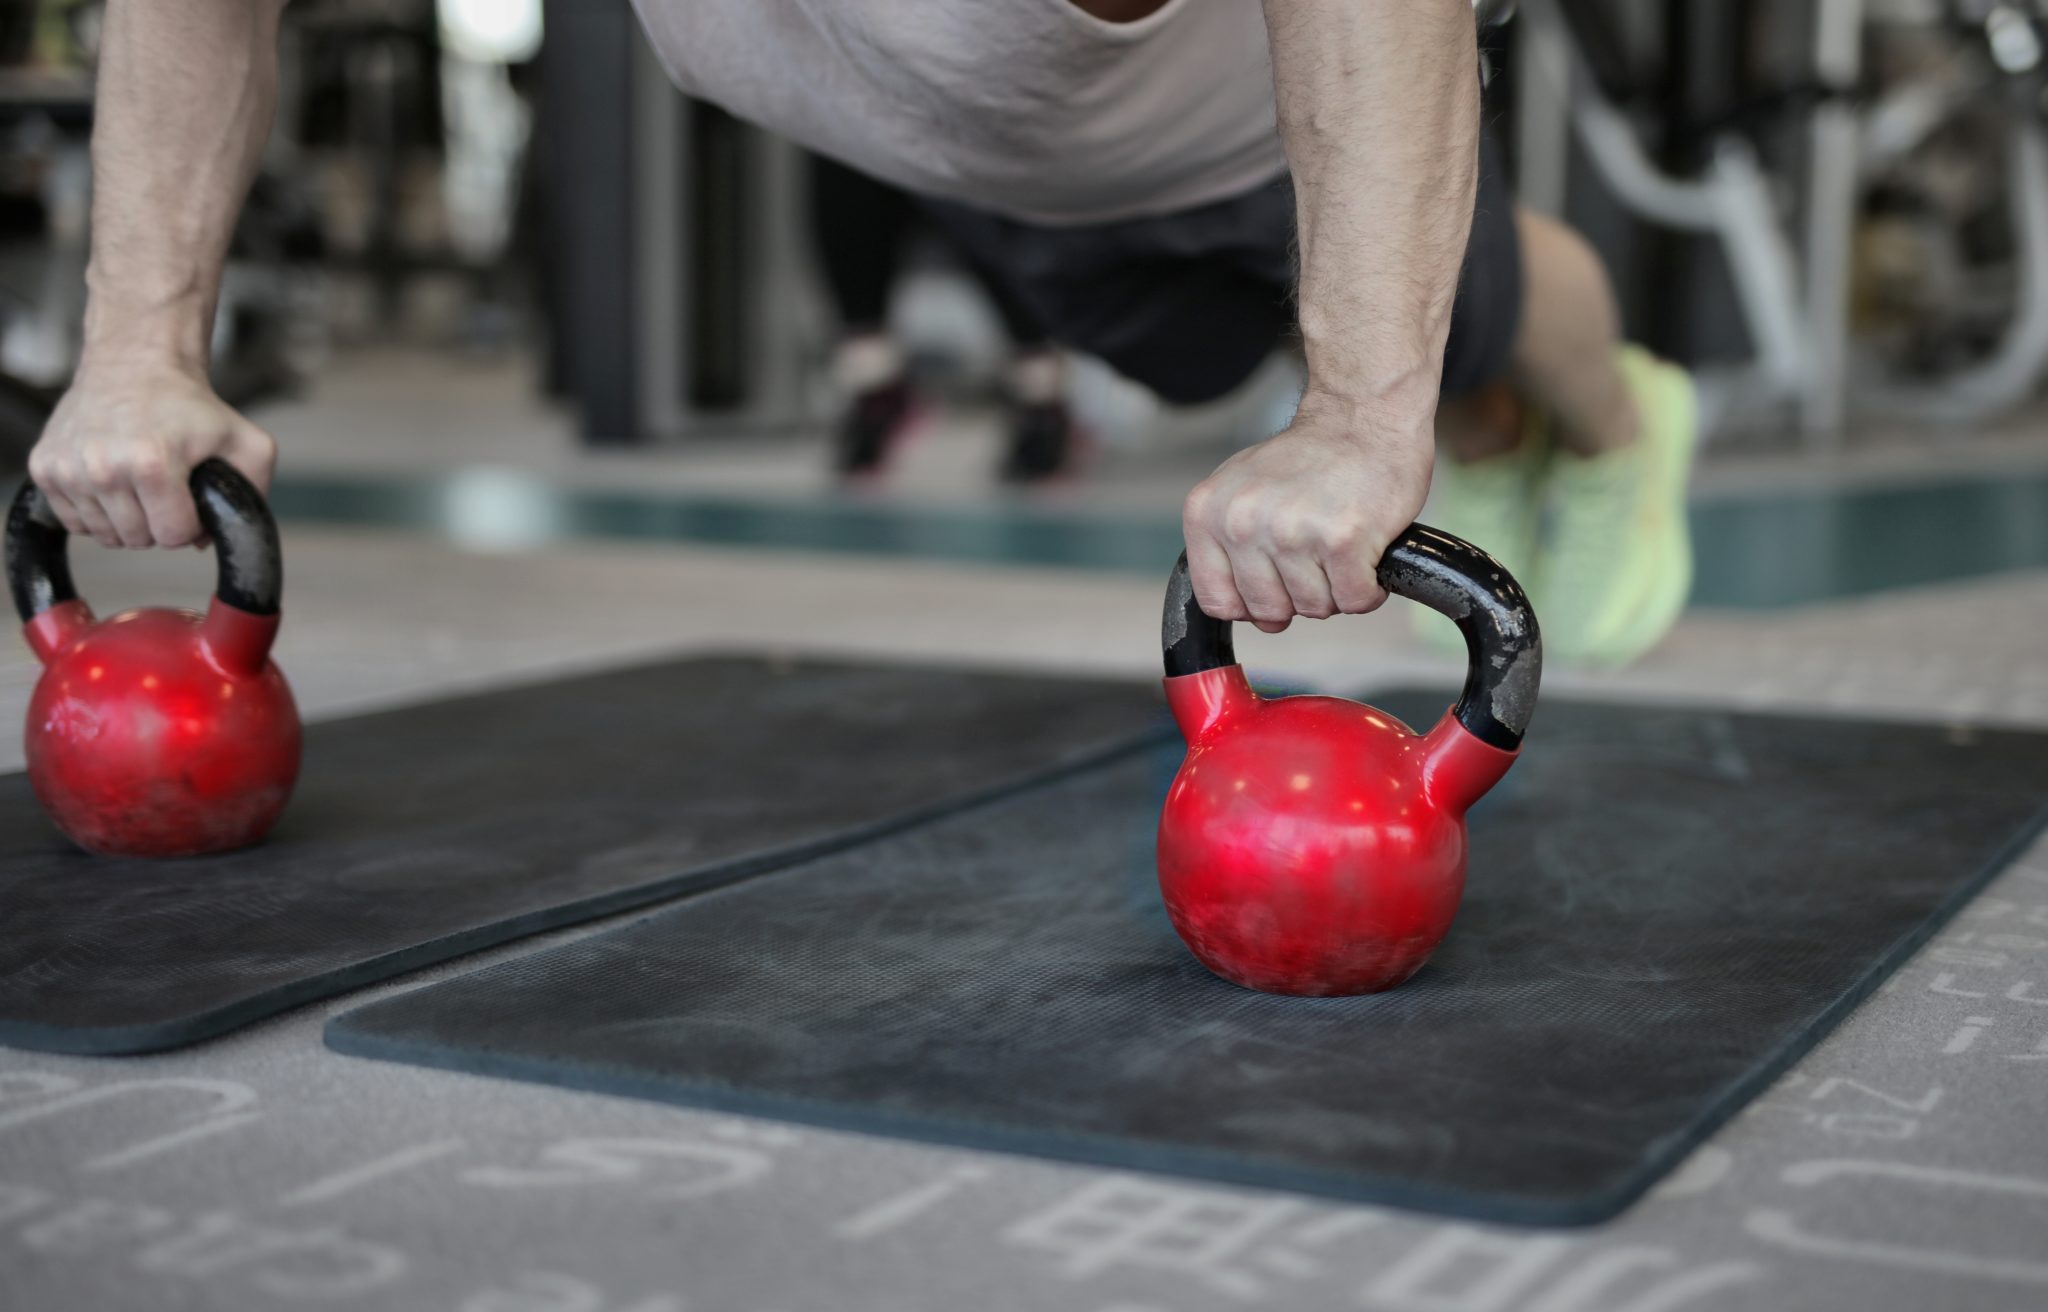 6 Benefits of Adding Kettlebells to Your Workout (Men AND Women)